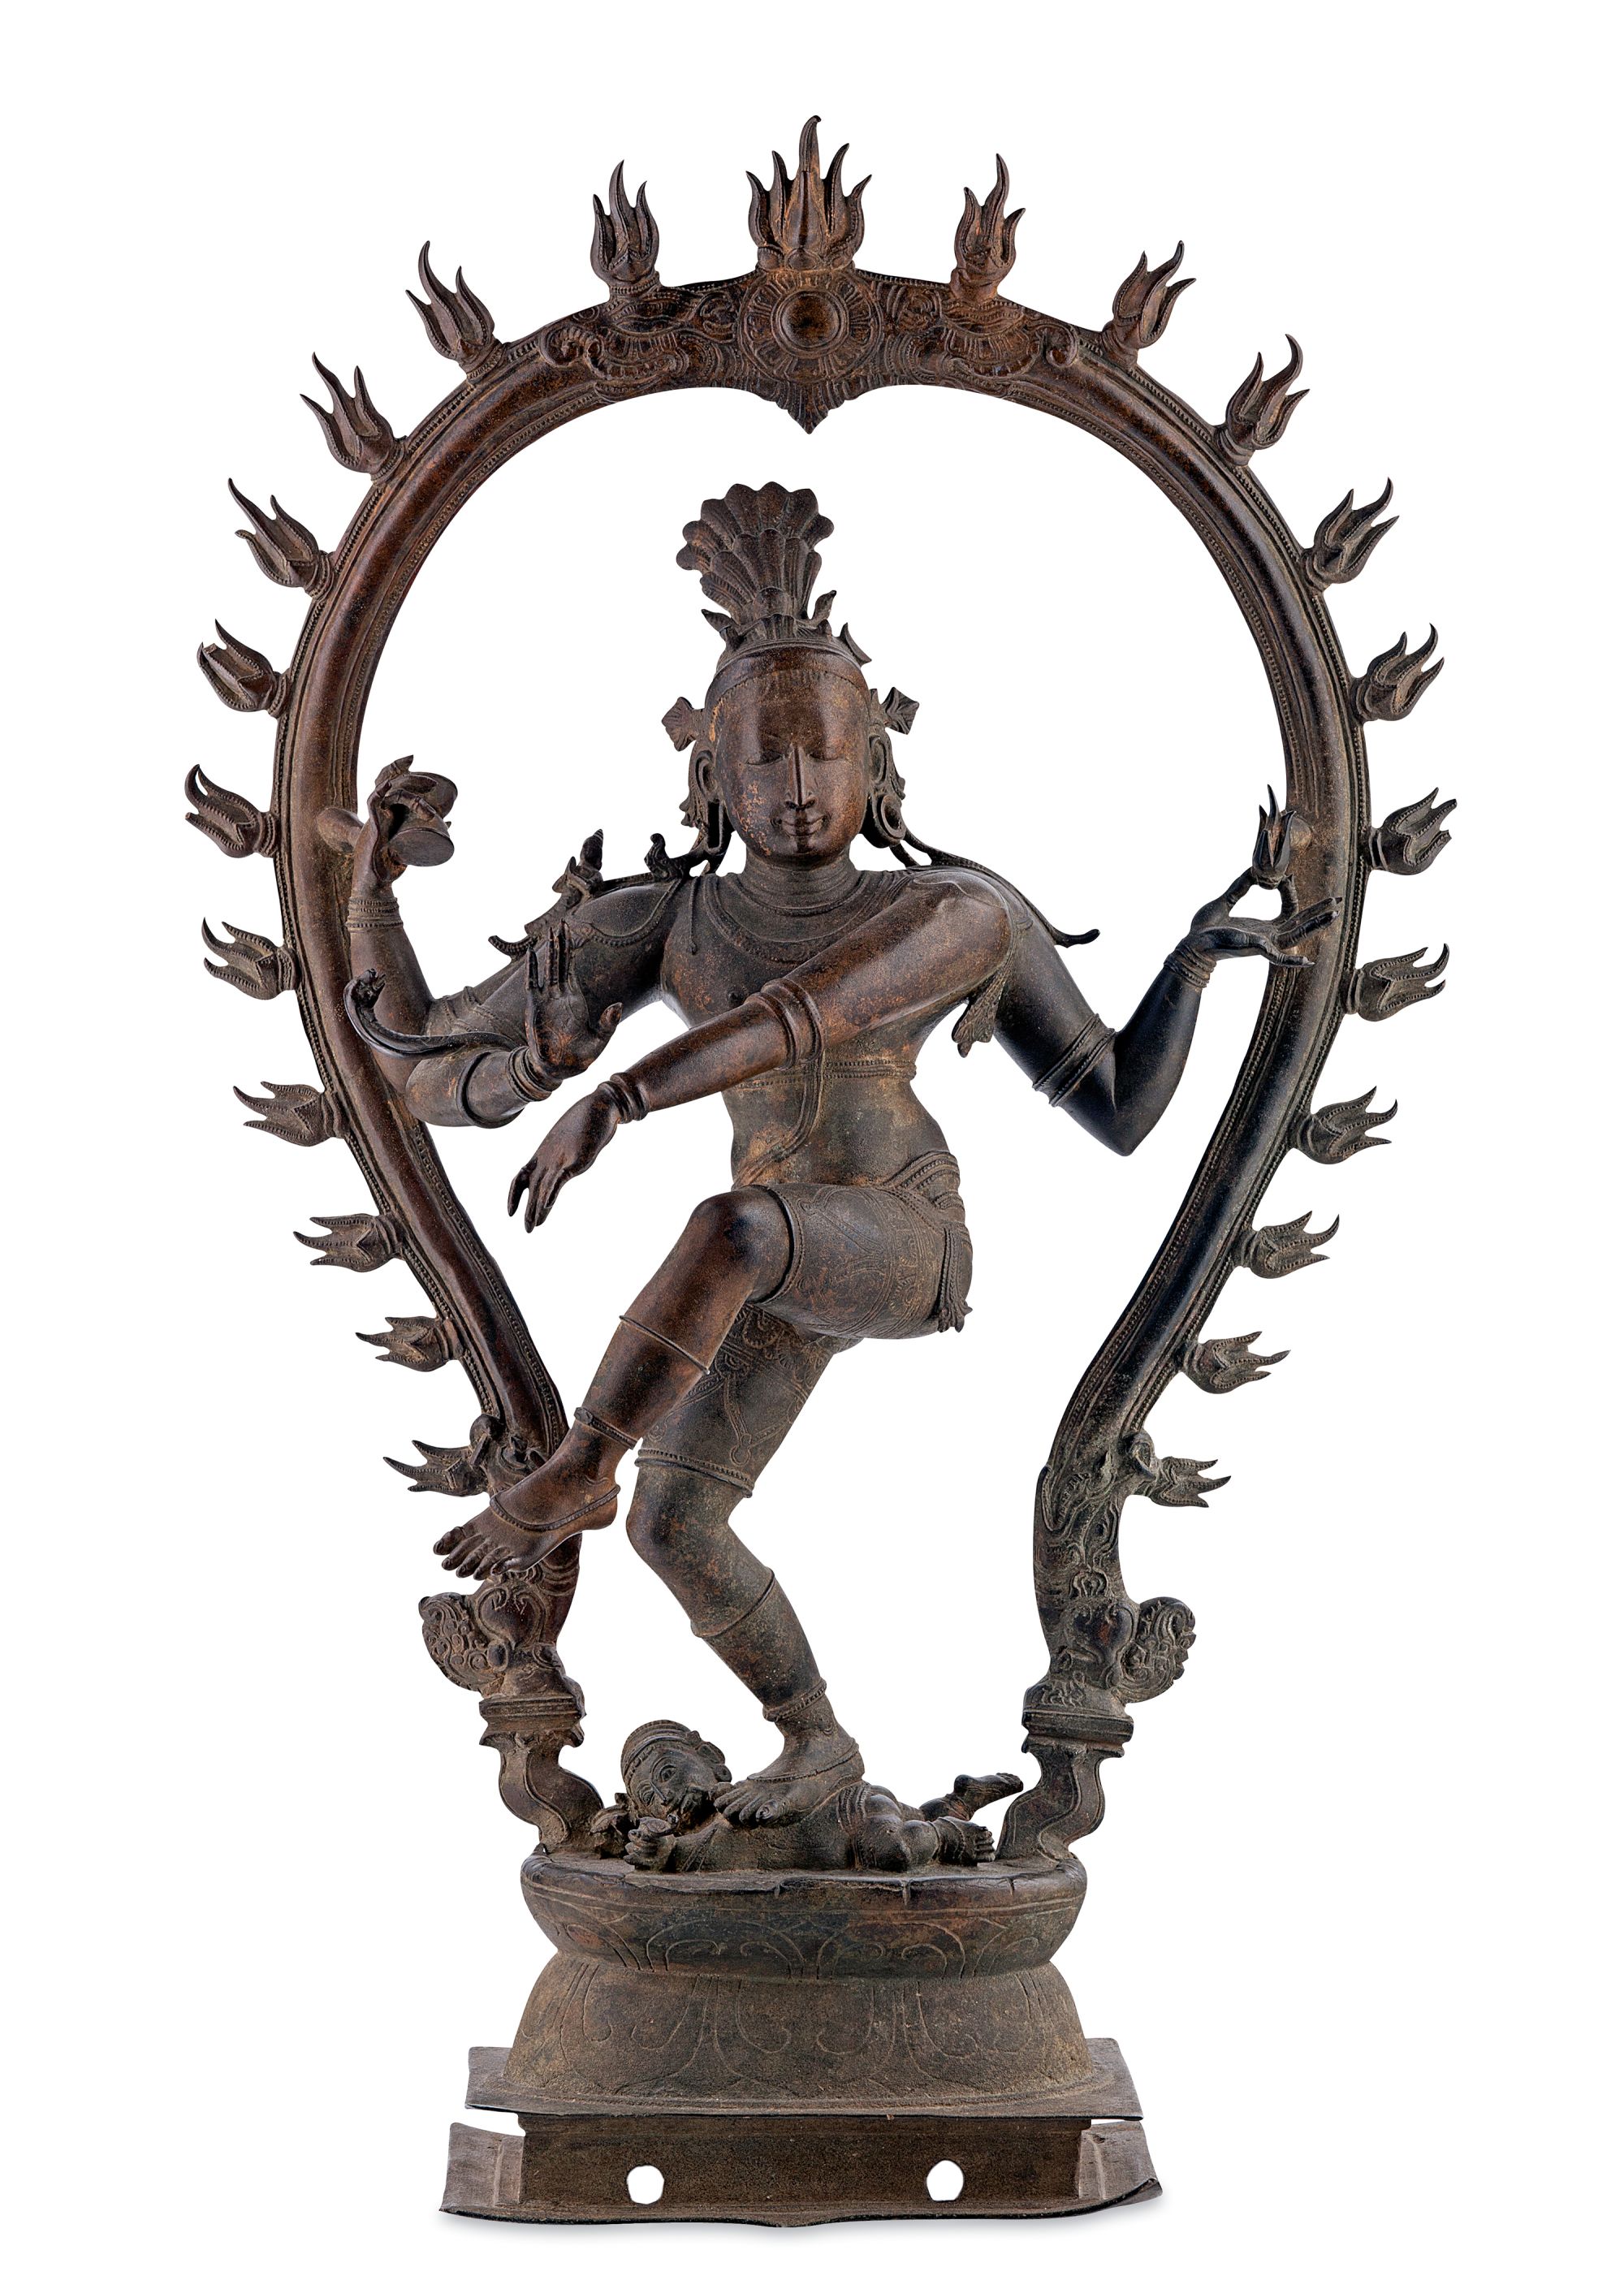 Dancing Shiva' statue in South Australia art gallery stolen from India